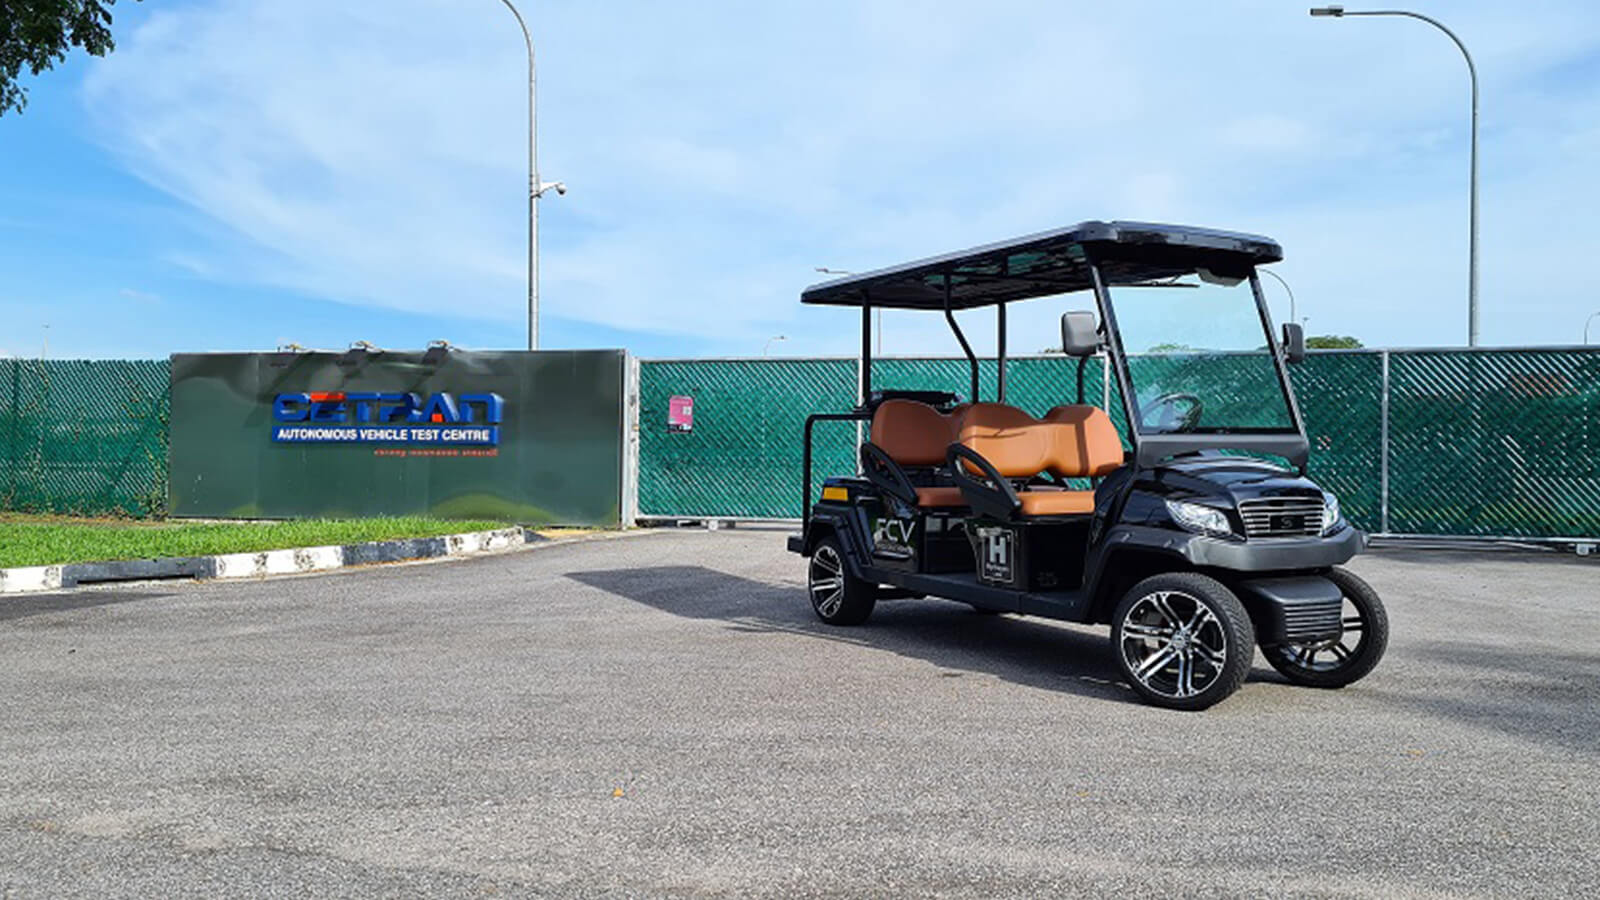 Spectronik’s hydrogen-fuel-cell-powered electric buggy